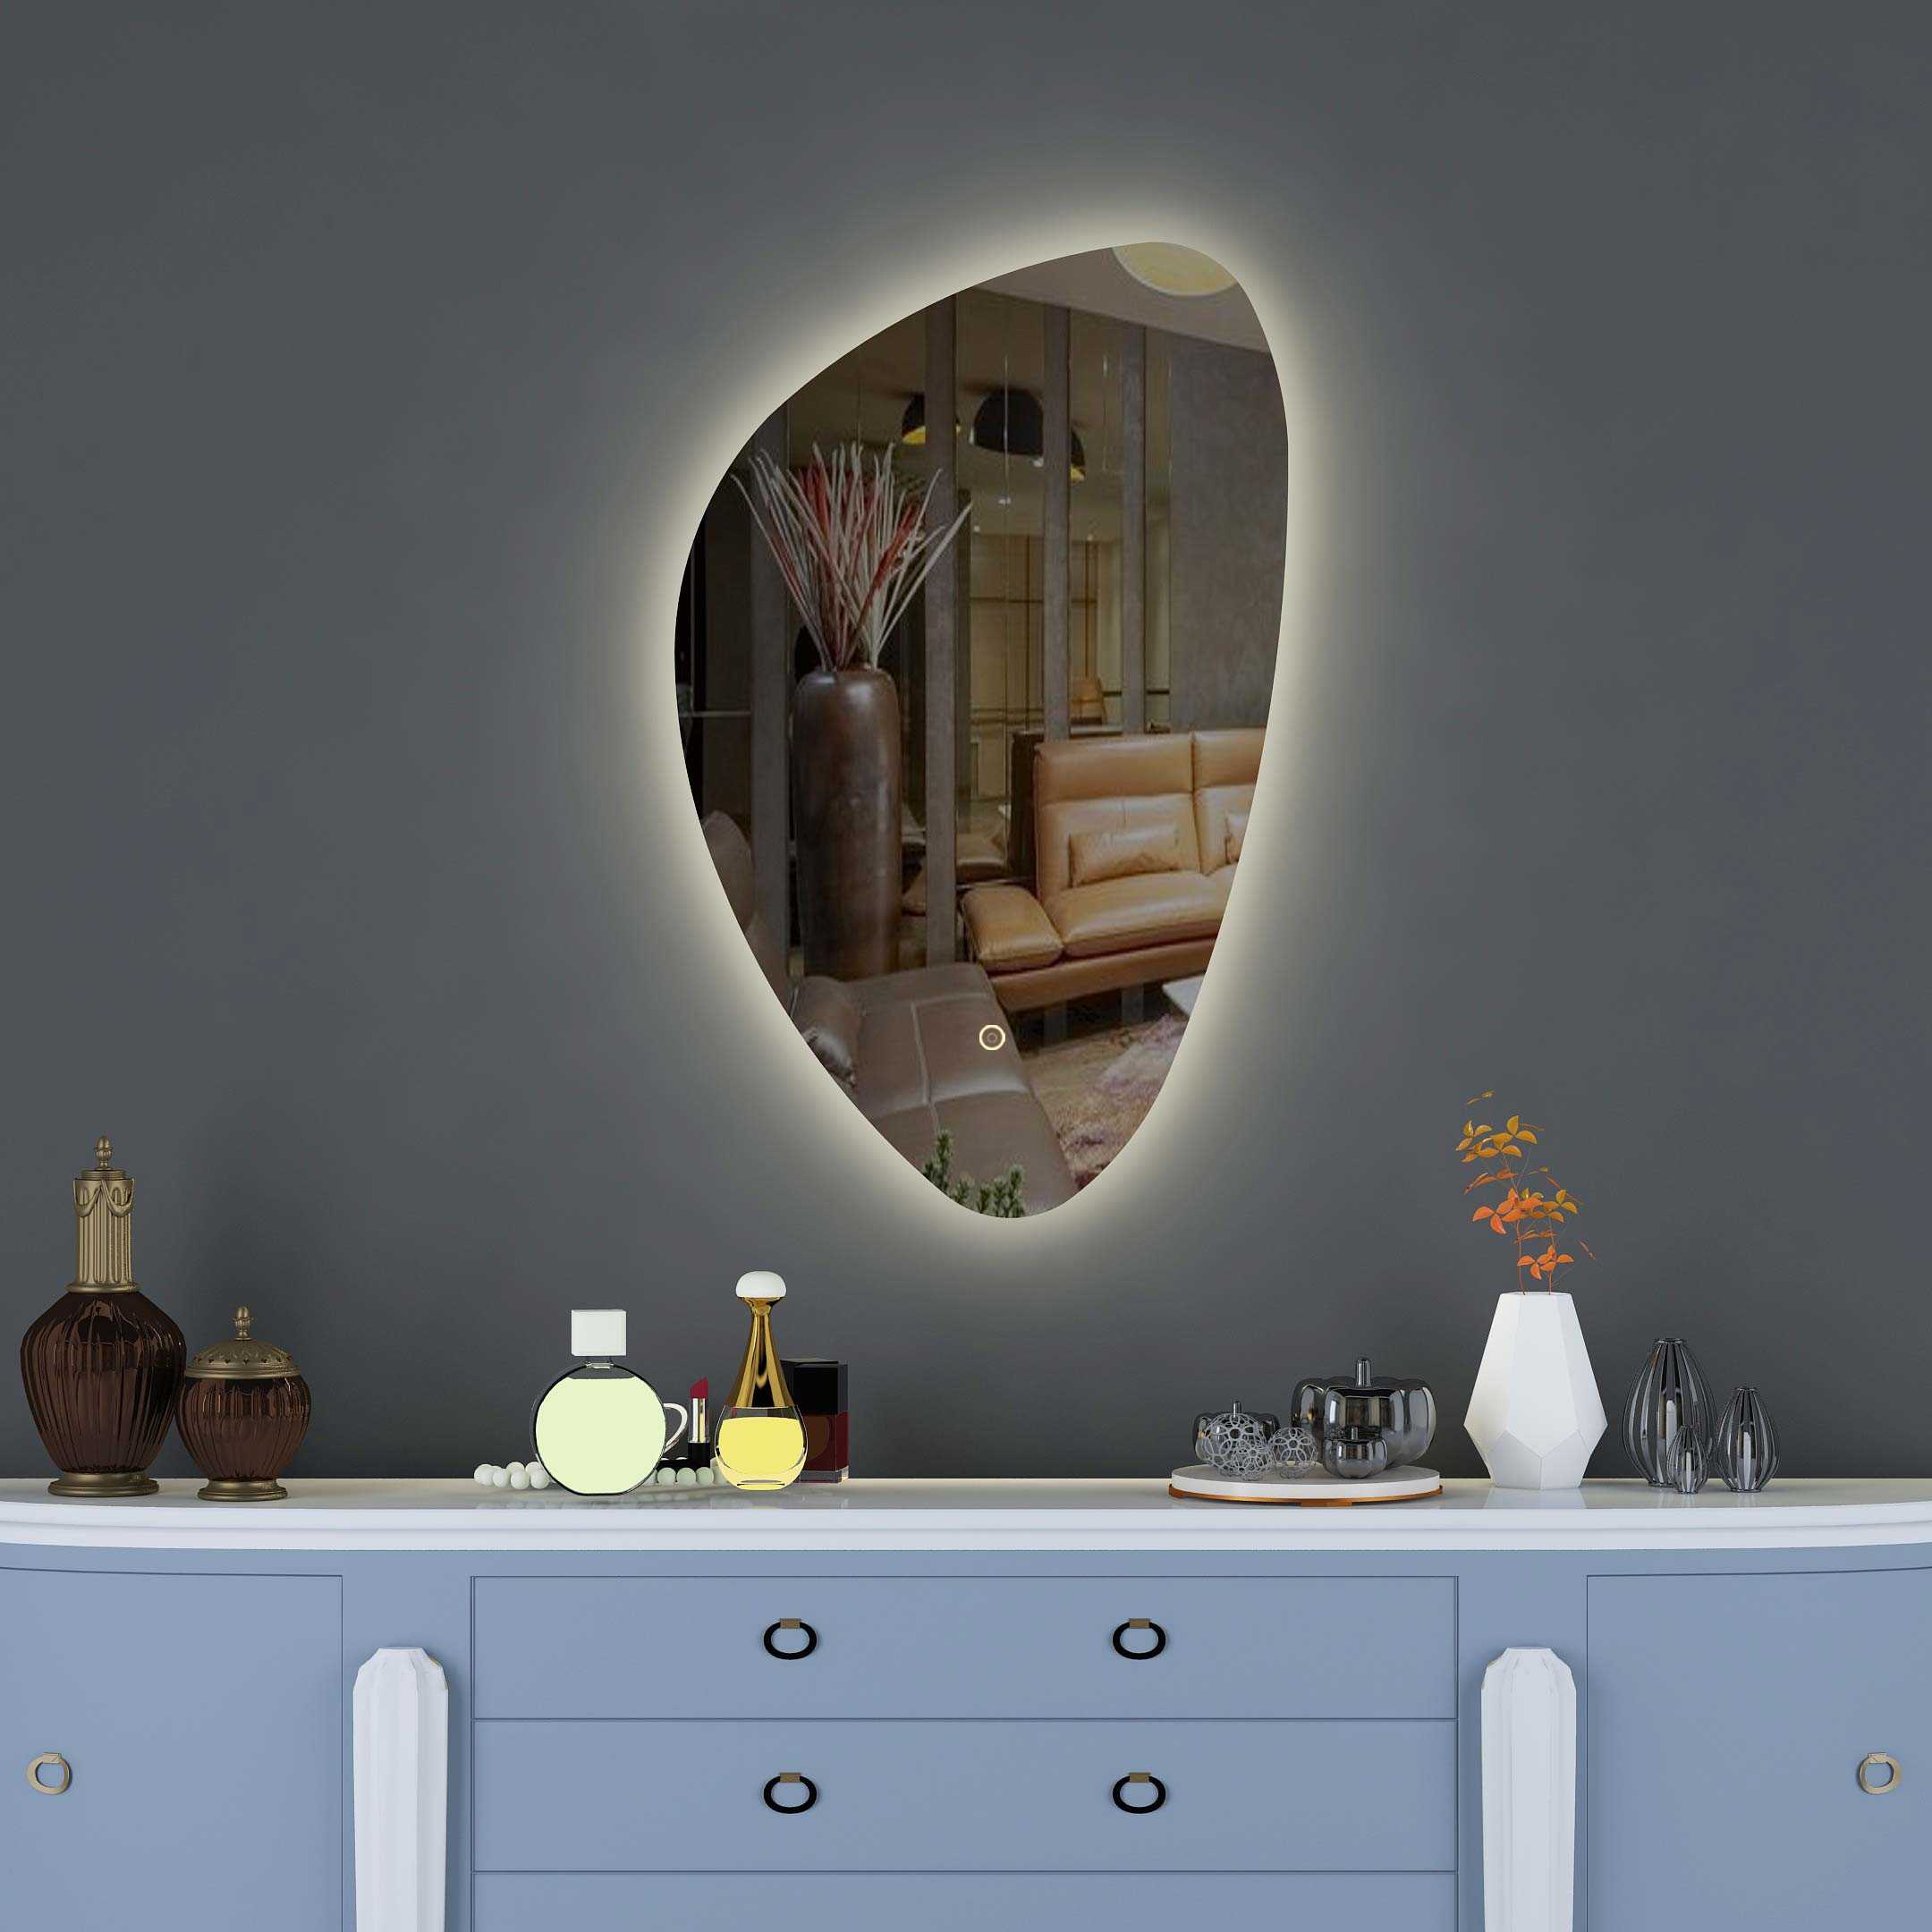 Mirrors - Woomdecor Buy Home Decor Items Online